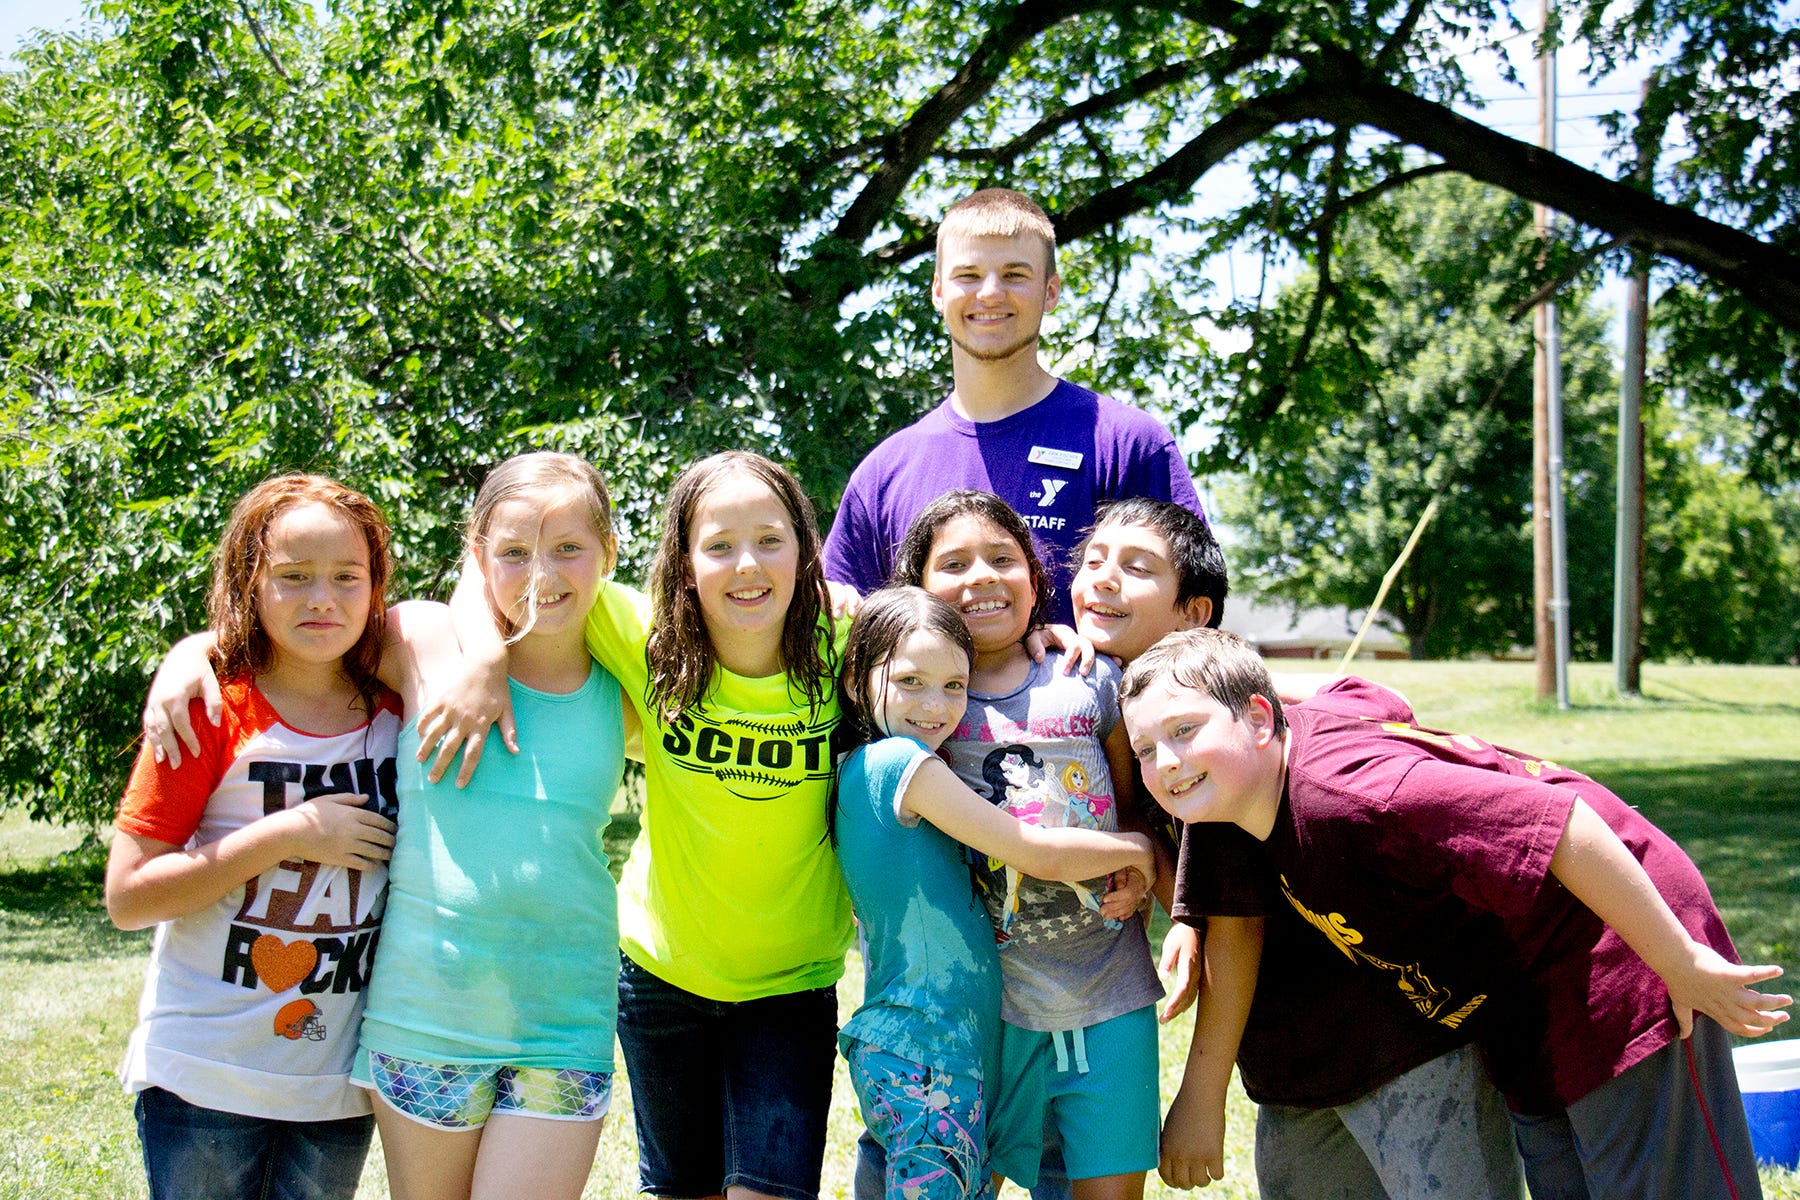 A YMCA of Central Ohio day camp